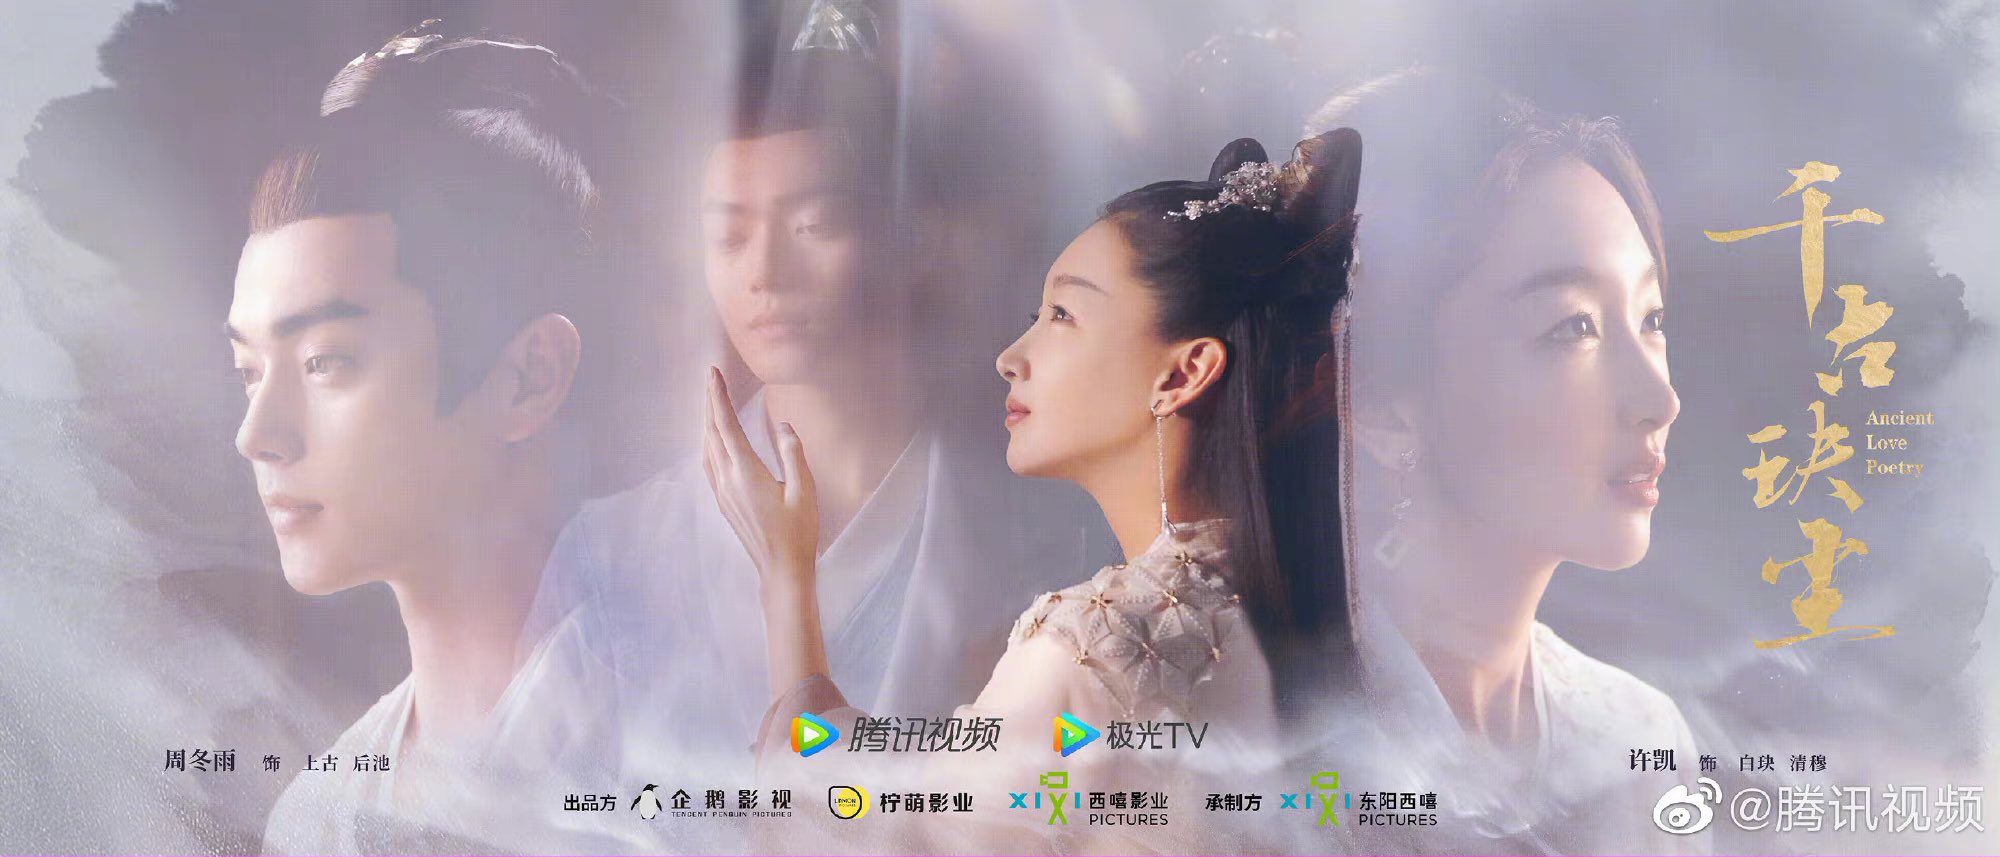 cdrama tweets on X: Xianxia romance #AncientLovePoetry shares new posters  of Zhou Dongyu and Xu Kai for the Tencent Video annual press conference  #千古玦尘  / X